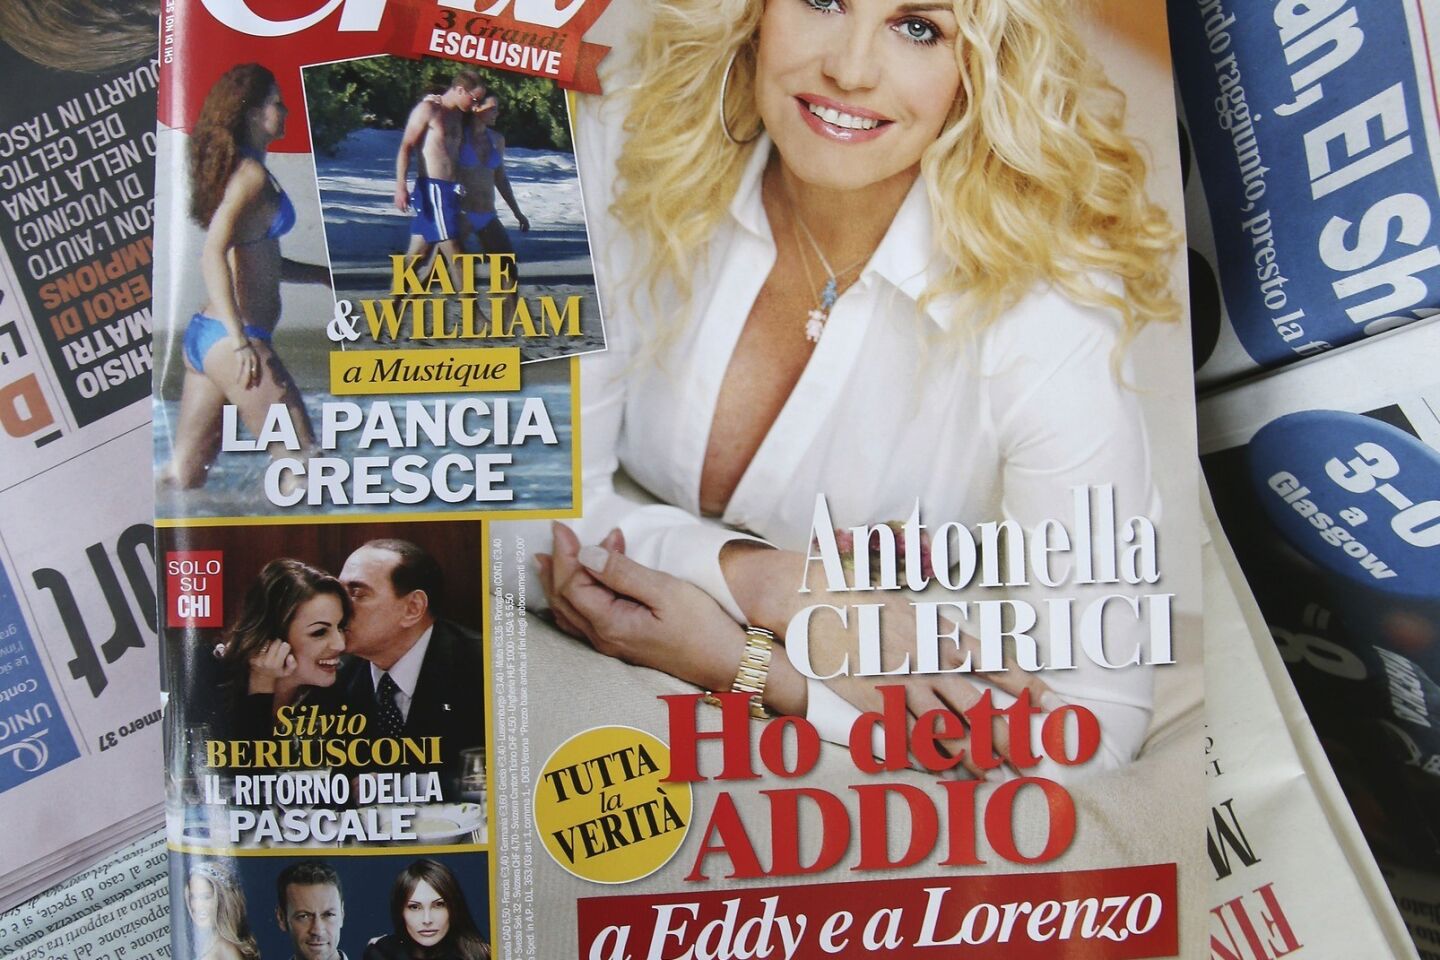 The cover of Italian magazine CHI hits the stands in Milan, Italy on Feb. 13, 2013. Royal officials in Britain expressed disappointment that paparazzi shots of Prince William and the Duchess of Cambridge strolling on a beach were published.